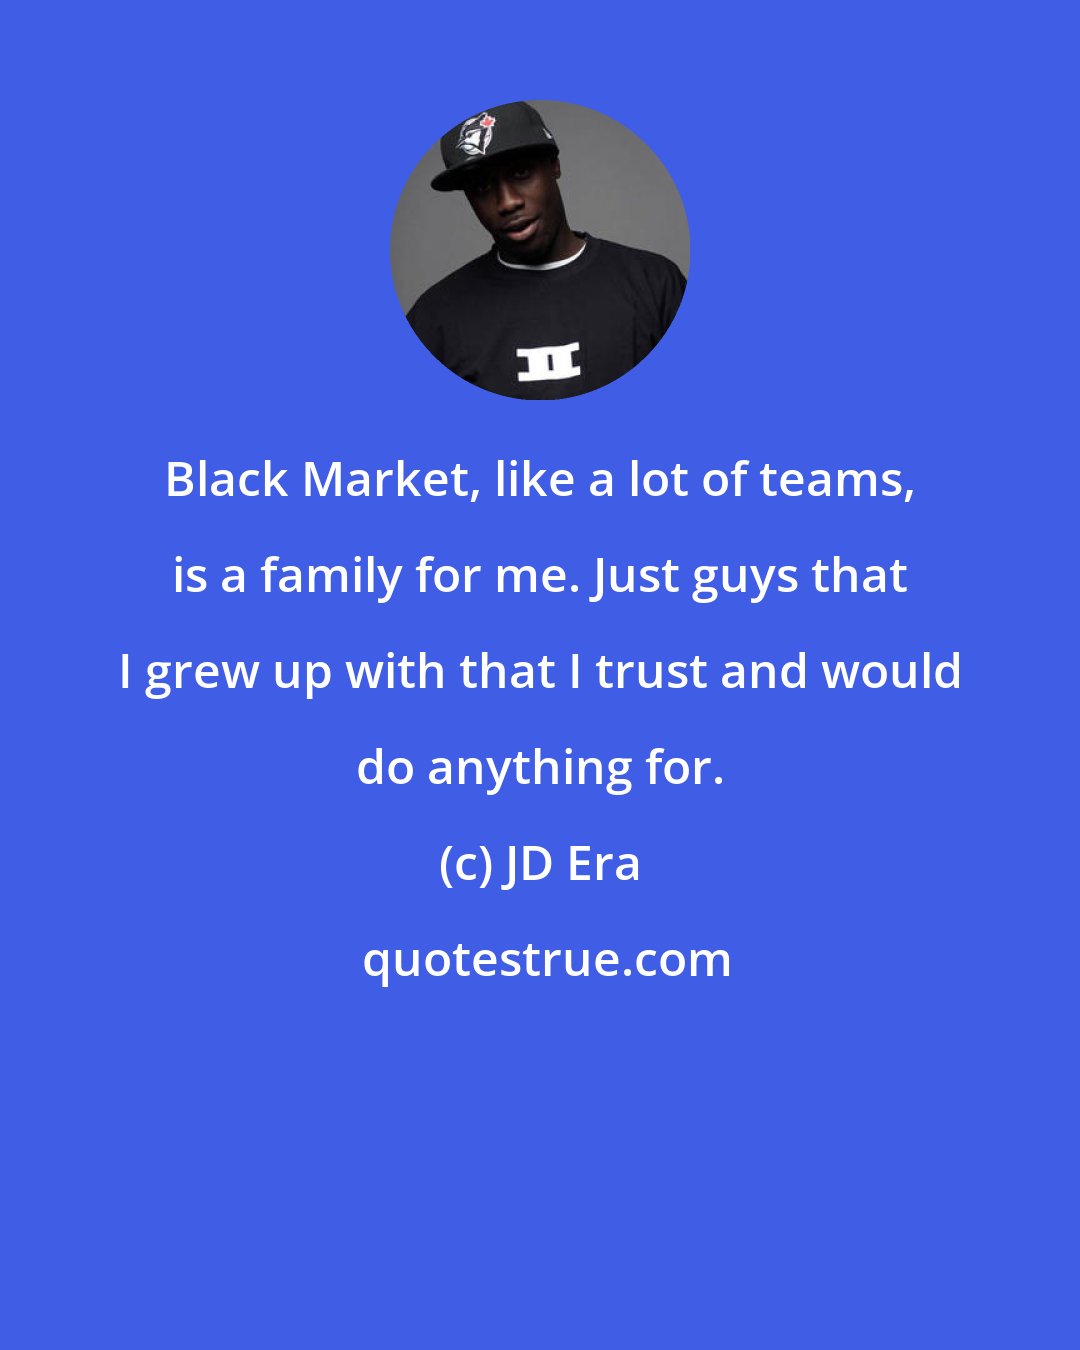 JD Era: Black Market, like a lot of teams, is a family for me. Just guys that I grew up with that I trust and would do anything for.